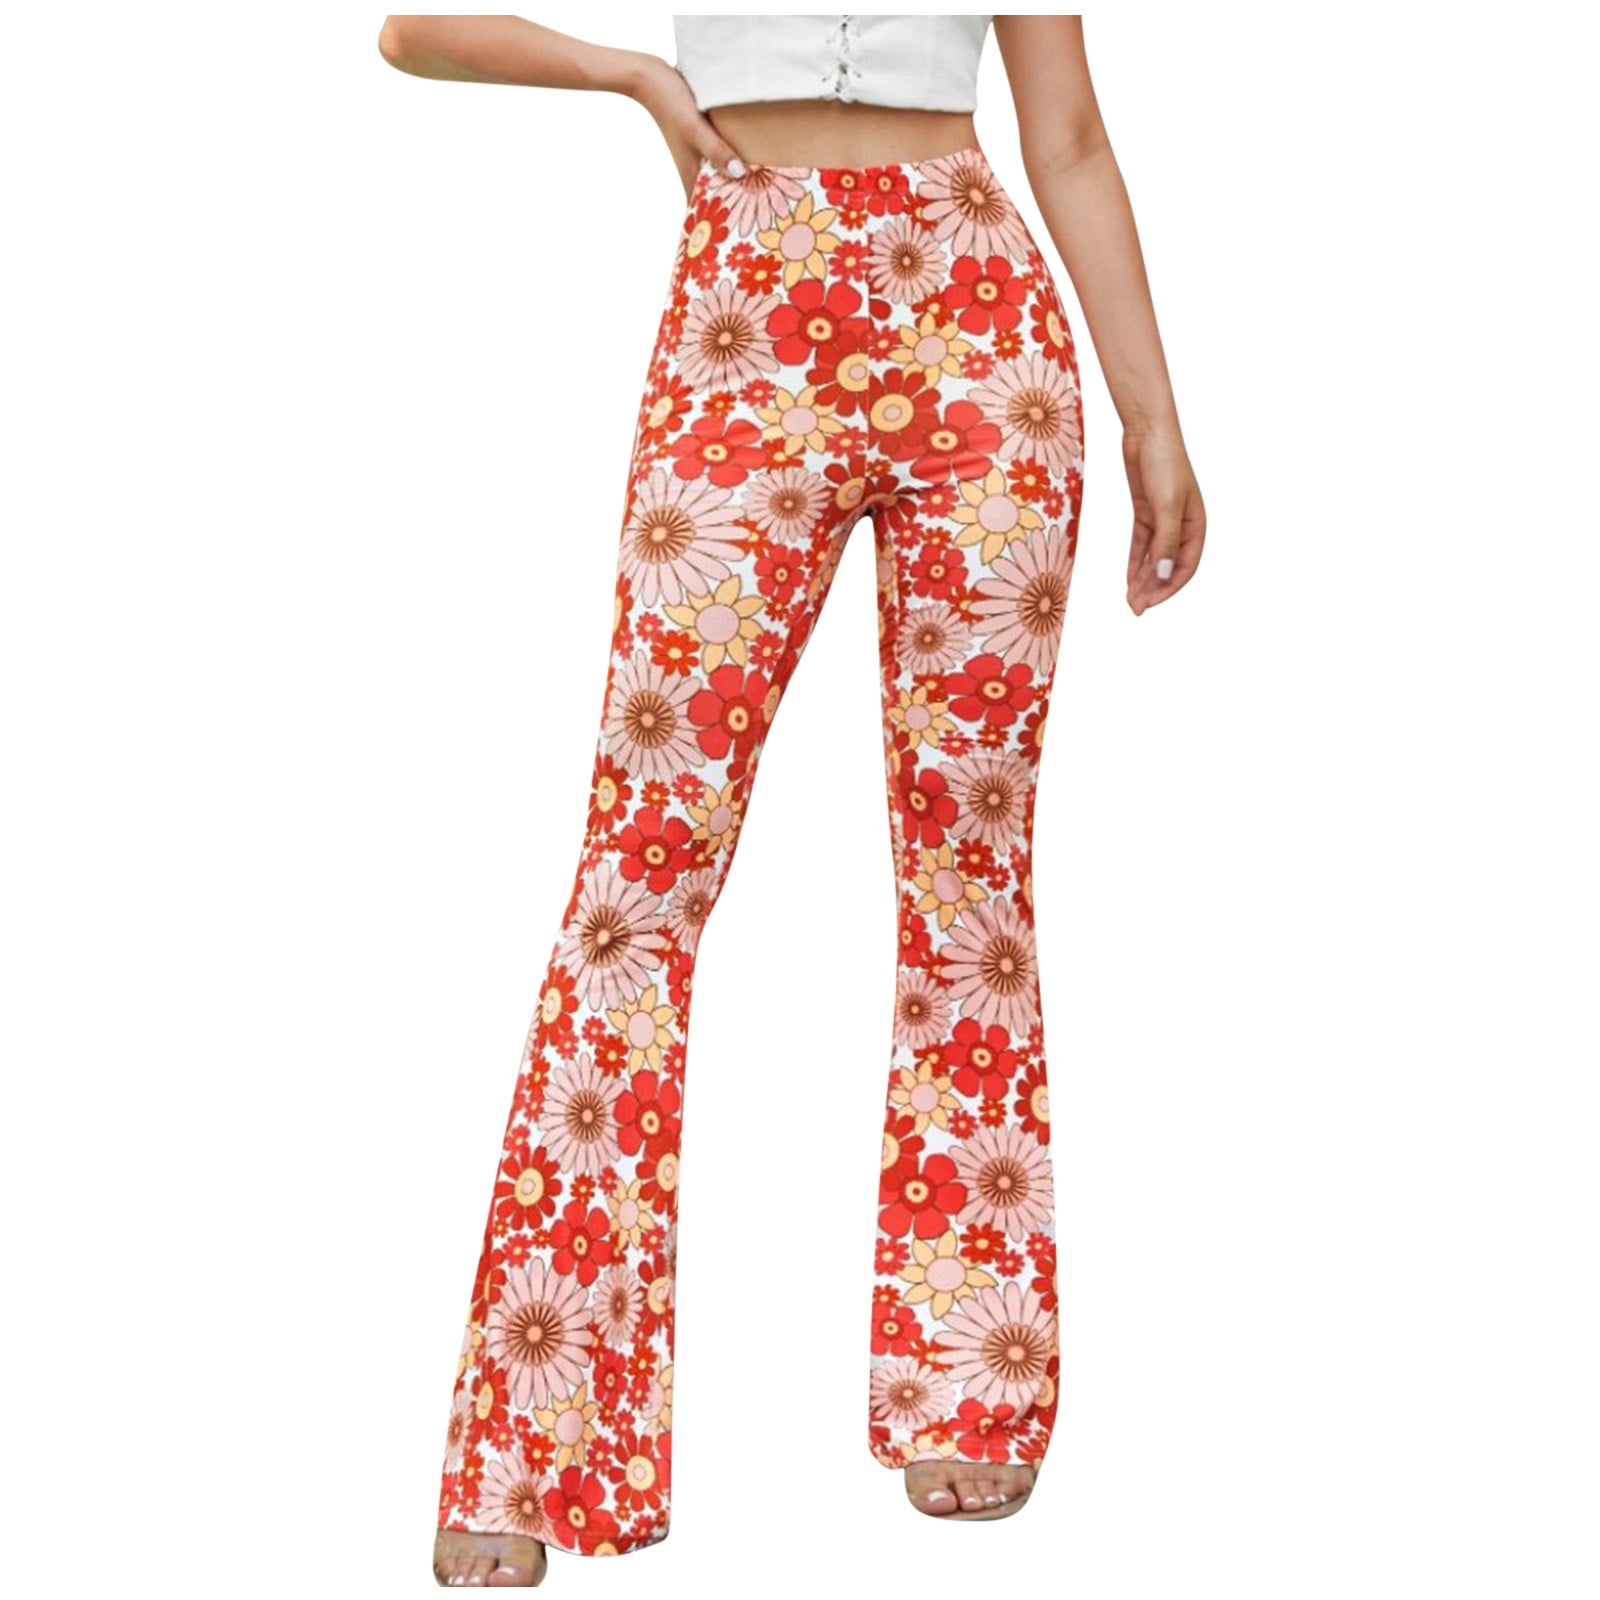 Cherry Red High-Rise Printed Pants